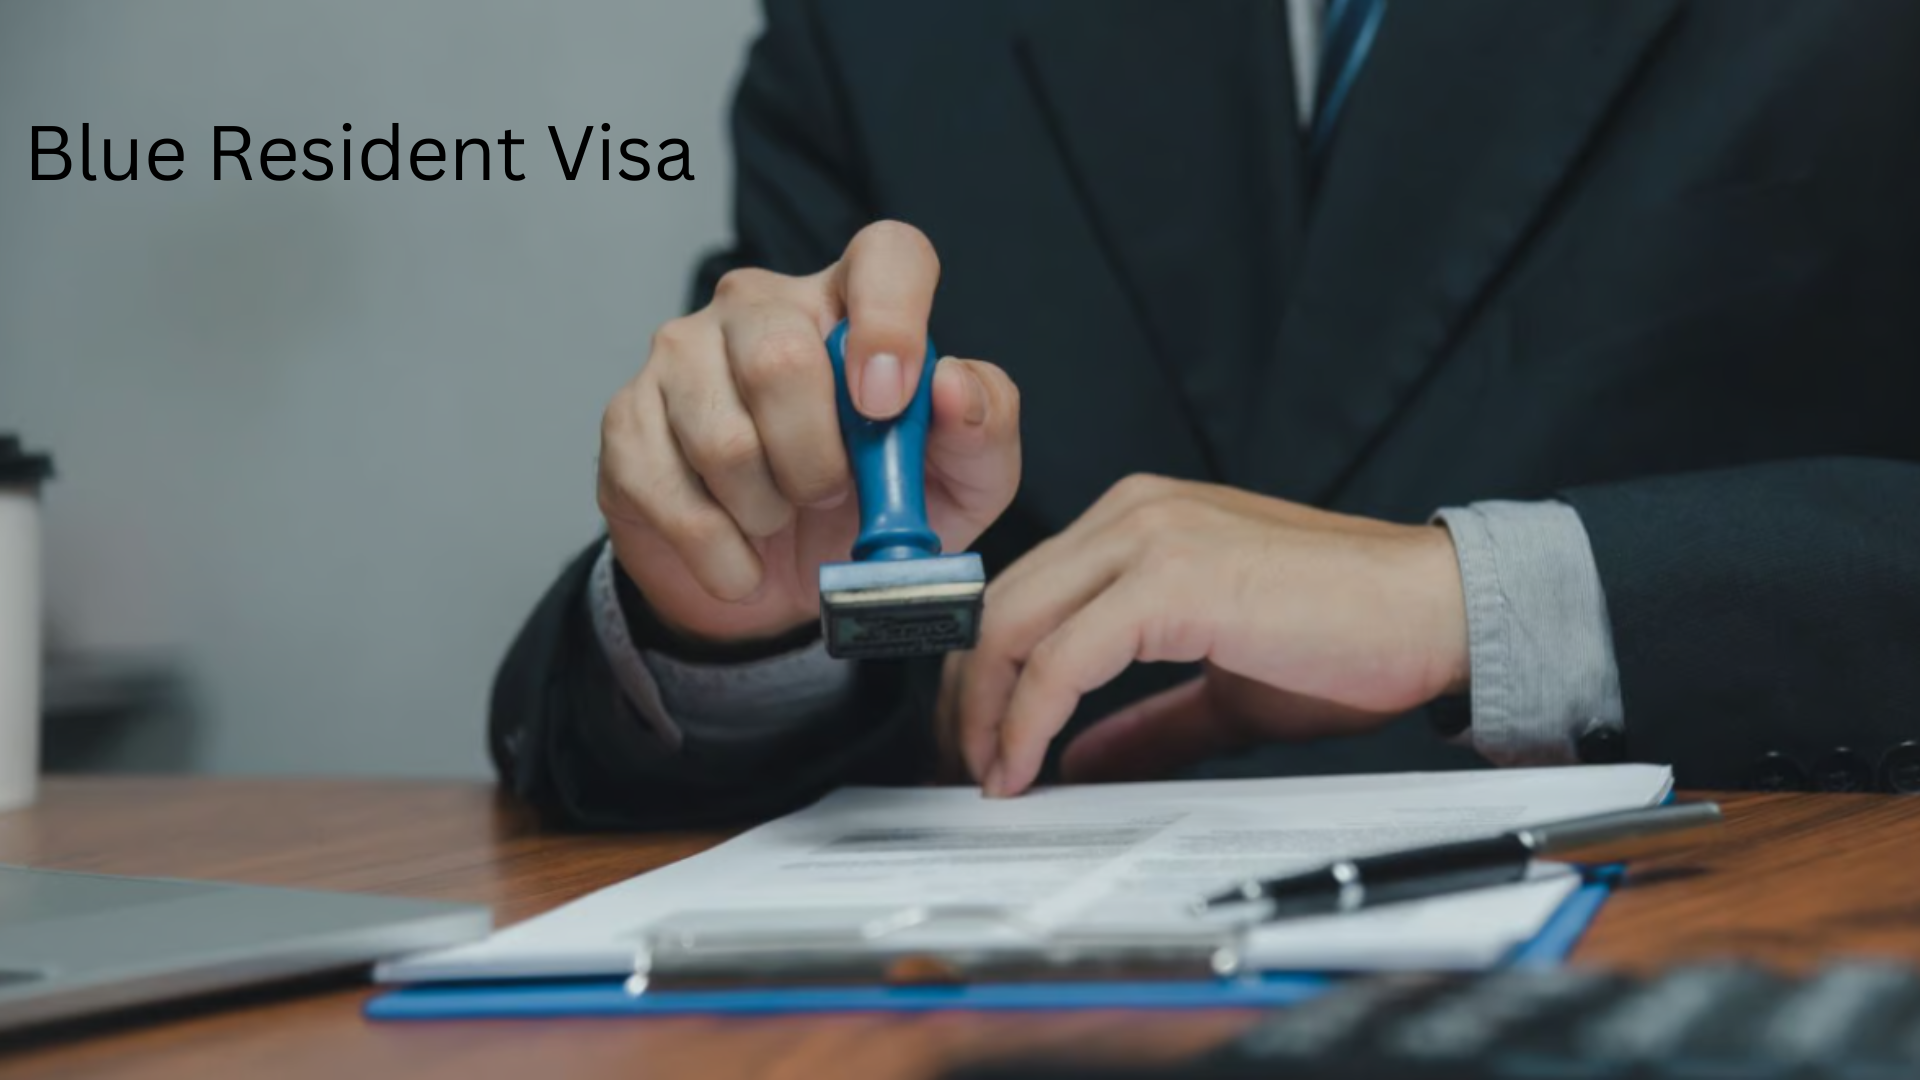 What Is The 10-Year Blue Resident Visa Launched By The UAE For Environmental Advocates, And How Can One Apply For It?